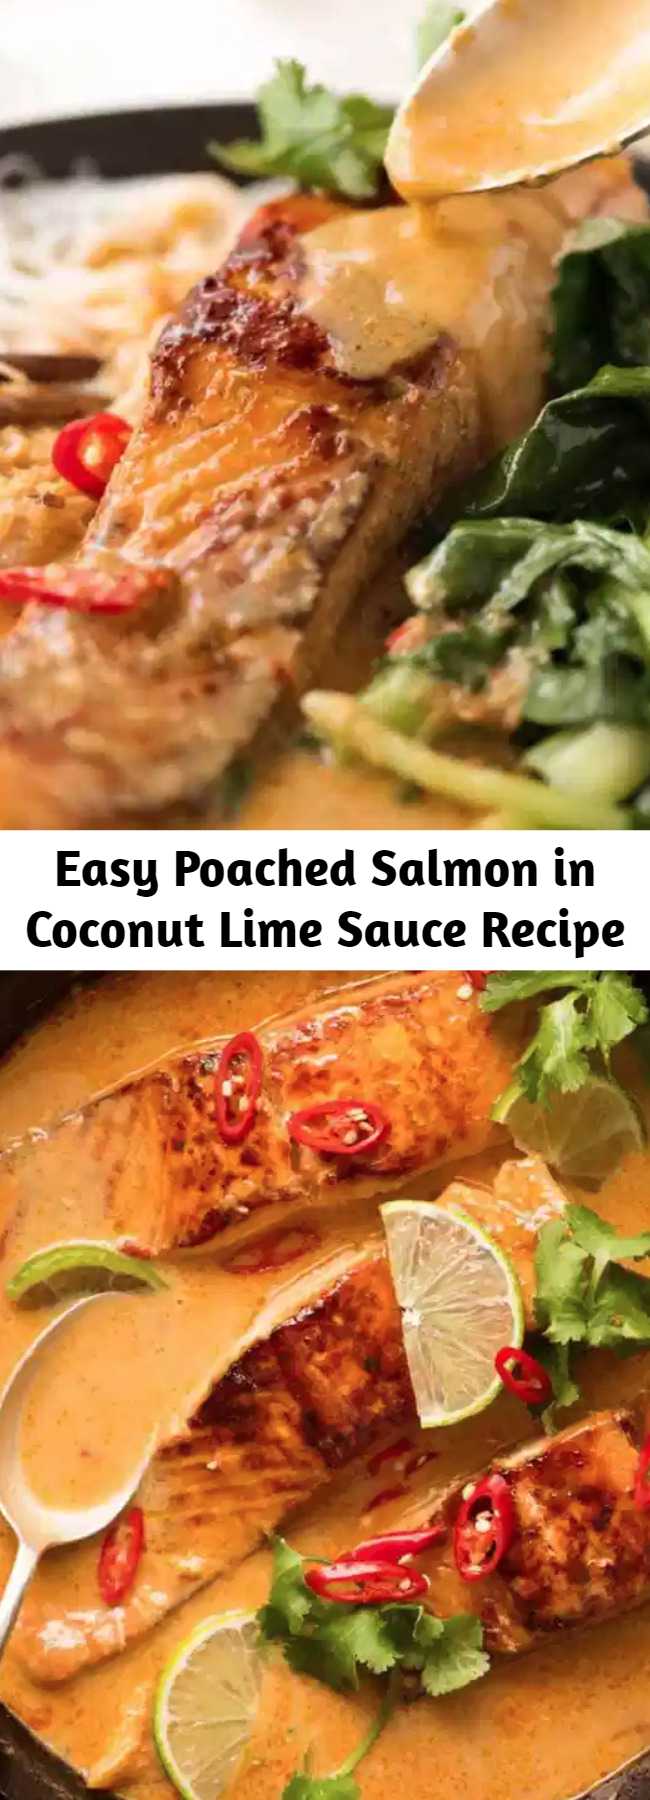 Easy Poached Salmon in Coconut Lime Sauce Recipe - Poached Salmon in a coconut lime sauce that tastes like a Thai coconut curry - except it's super quick and easy to make! Even though the salmon is poached, it's well worth searing lightly to brown for the extra flavour on both the salmon and in the sauce.